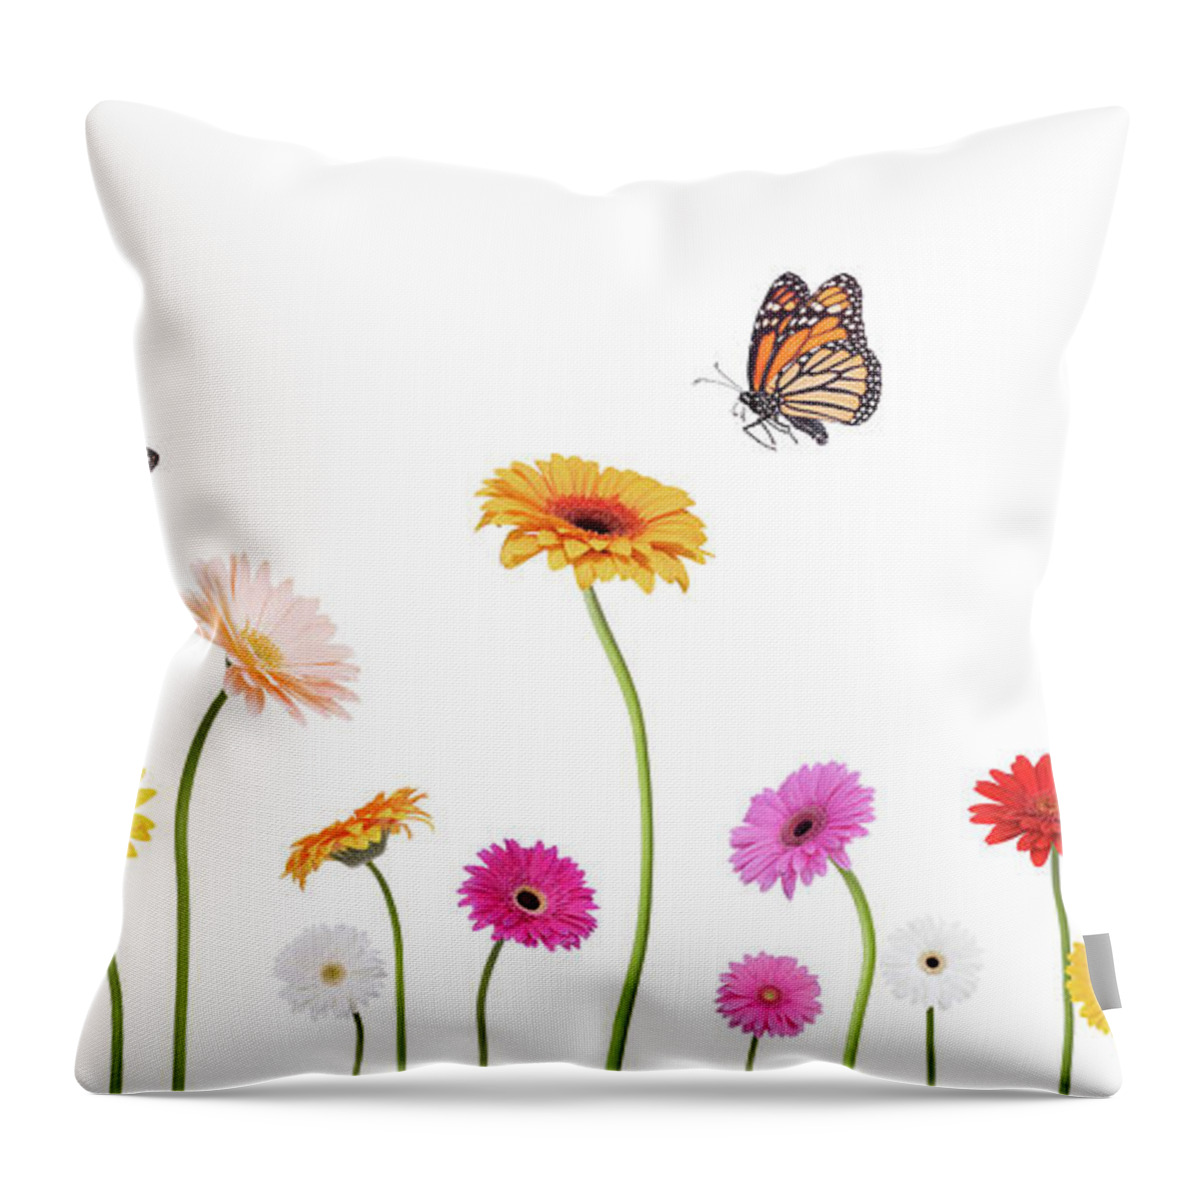 Scenics Throw Pillow featuring the photograph Colroful Spring Gerbera Daisies And by Liliboas